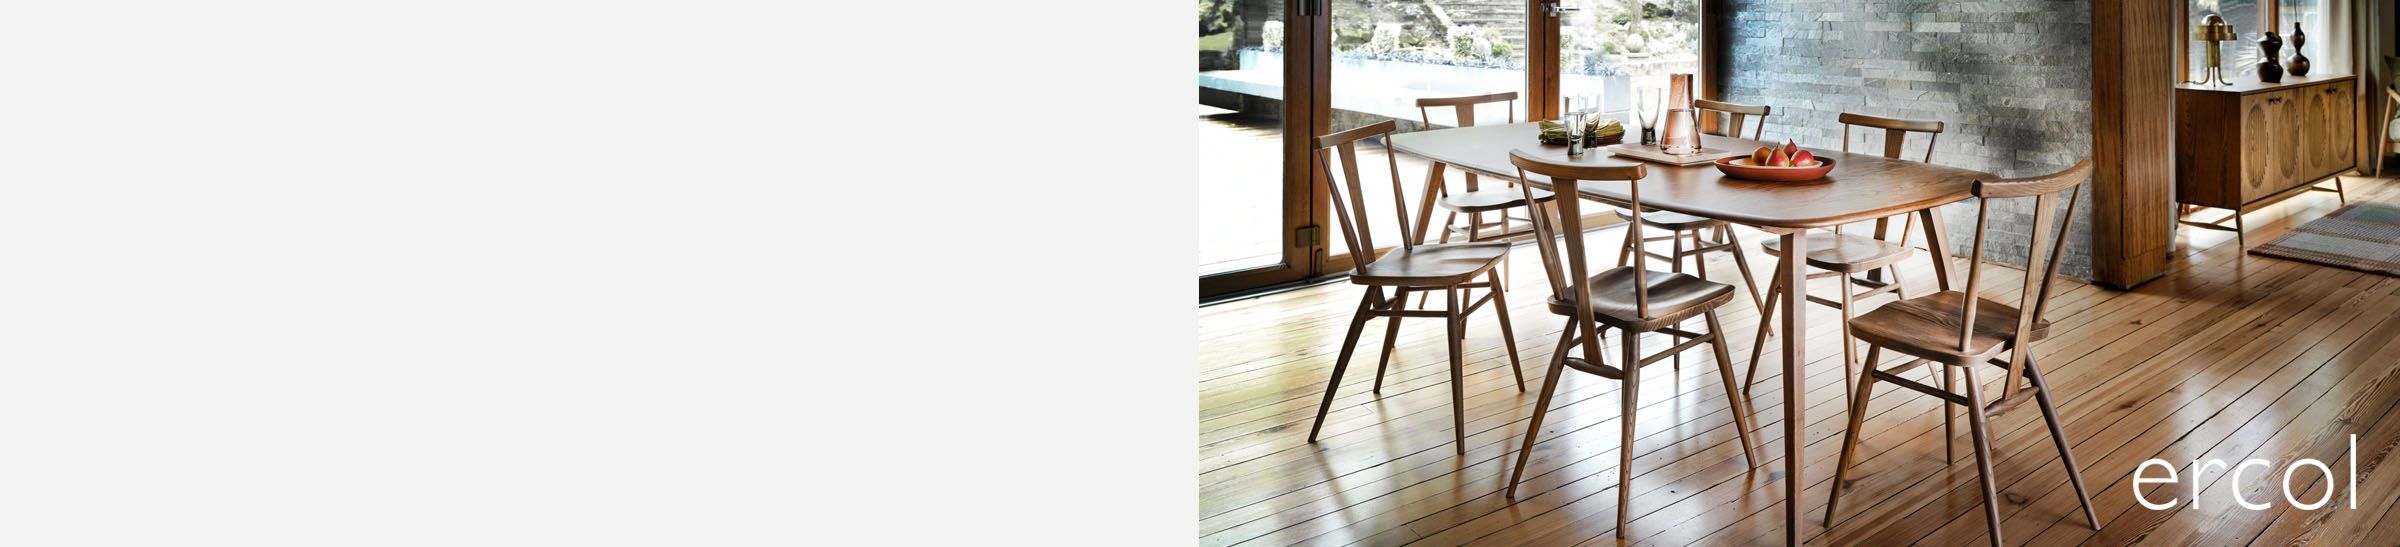 Ercol products